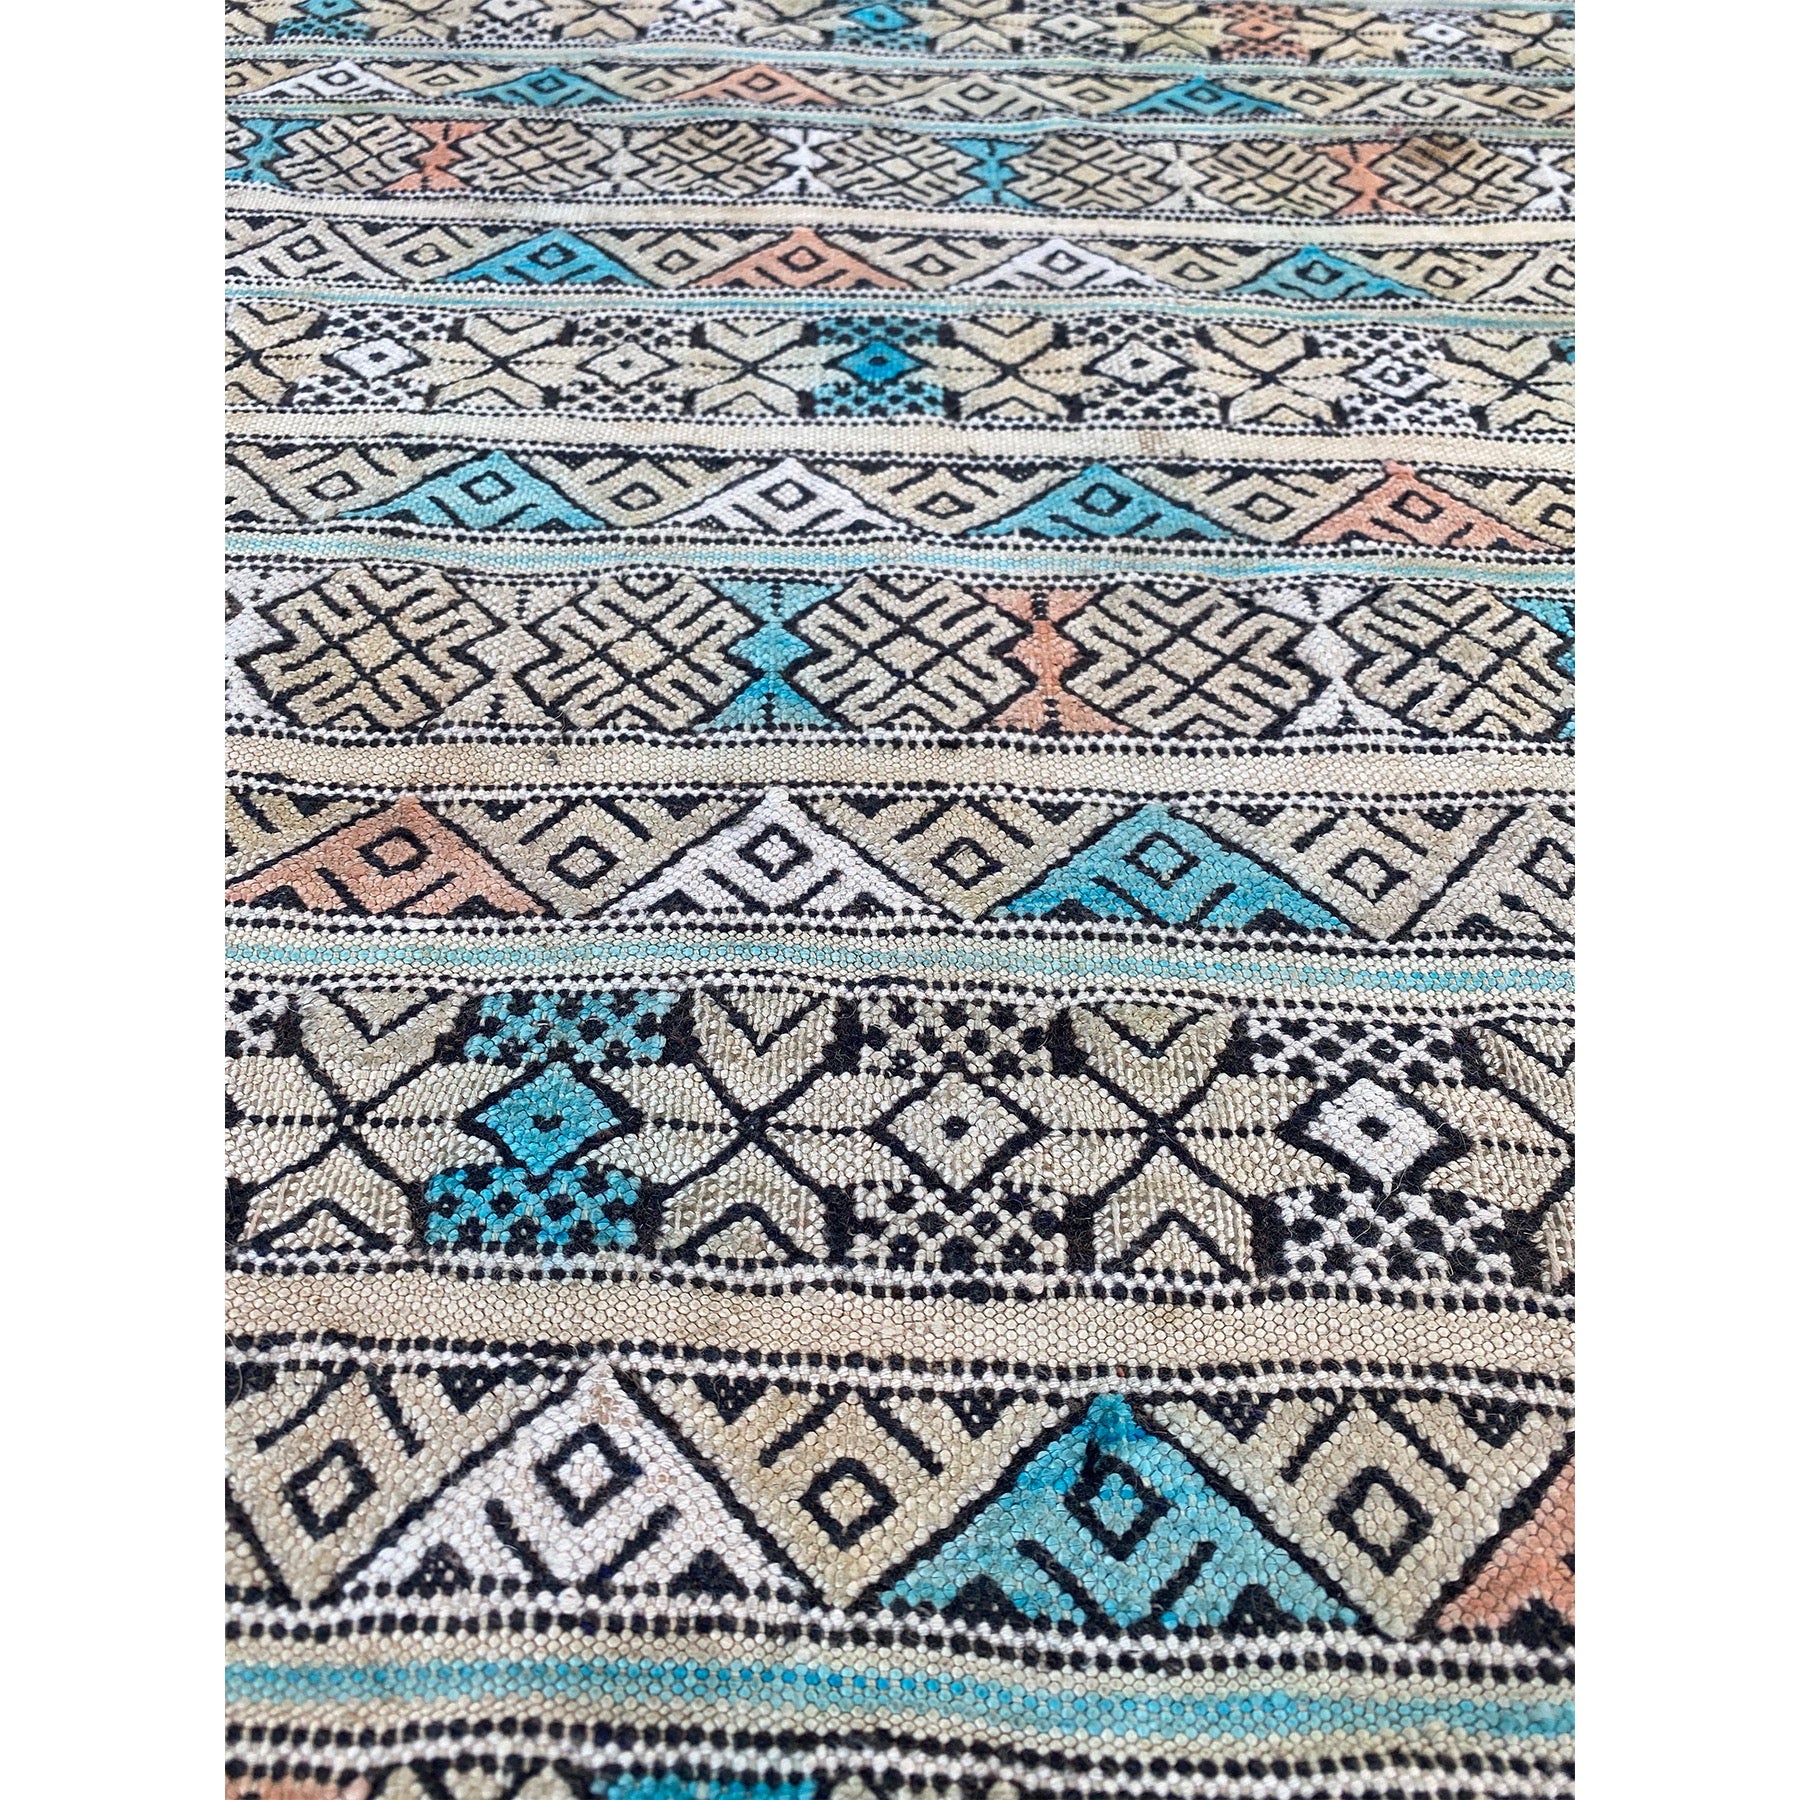 Vintage tribal flatwoven Moroccan runner rug with blue and pink details - Kantara | Moroccan Rugs